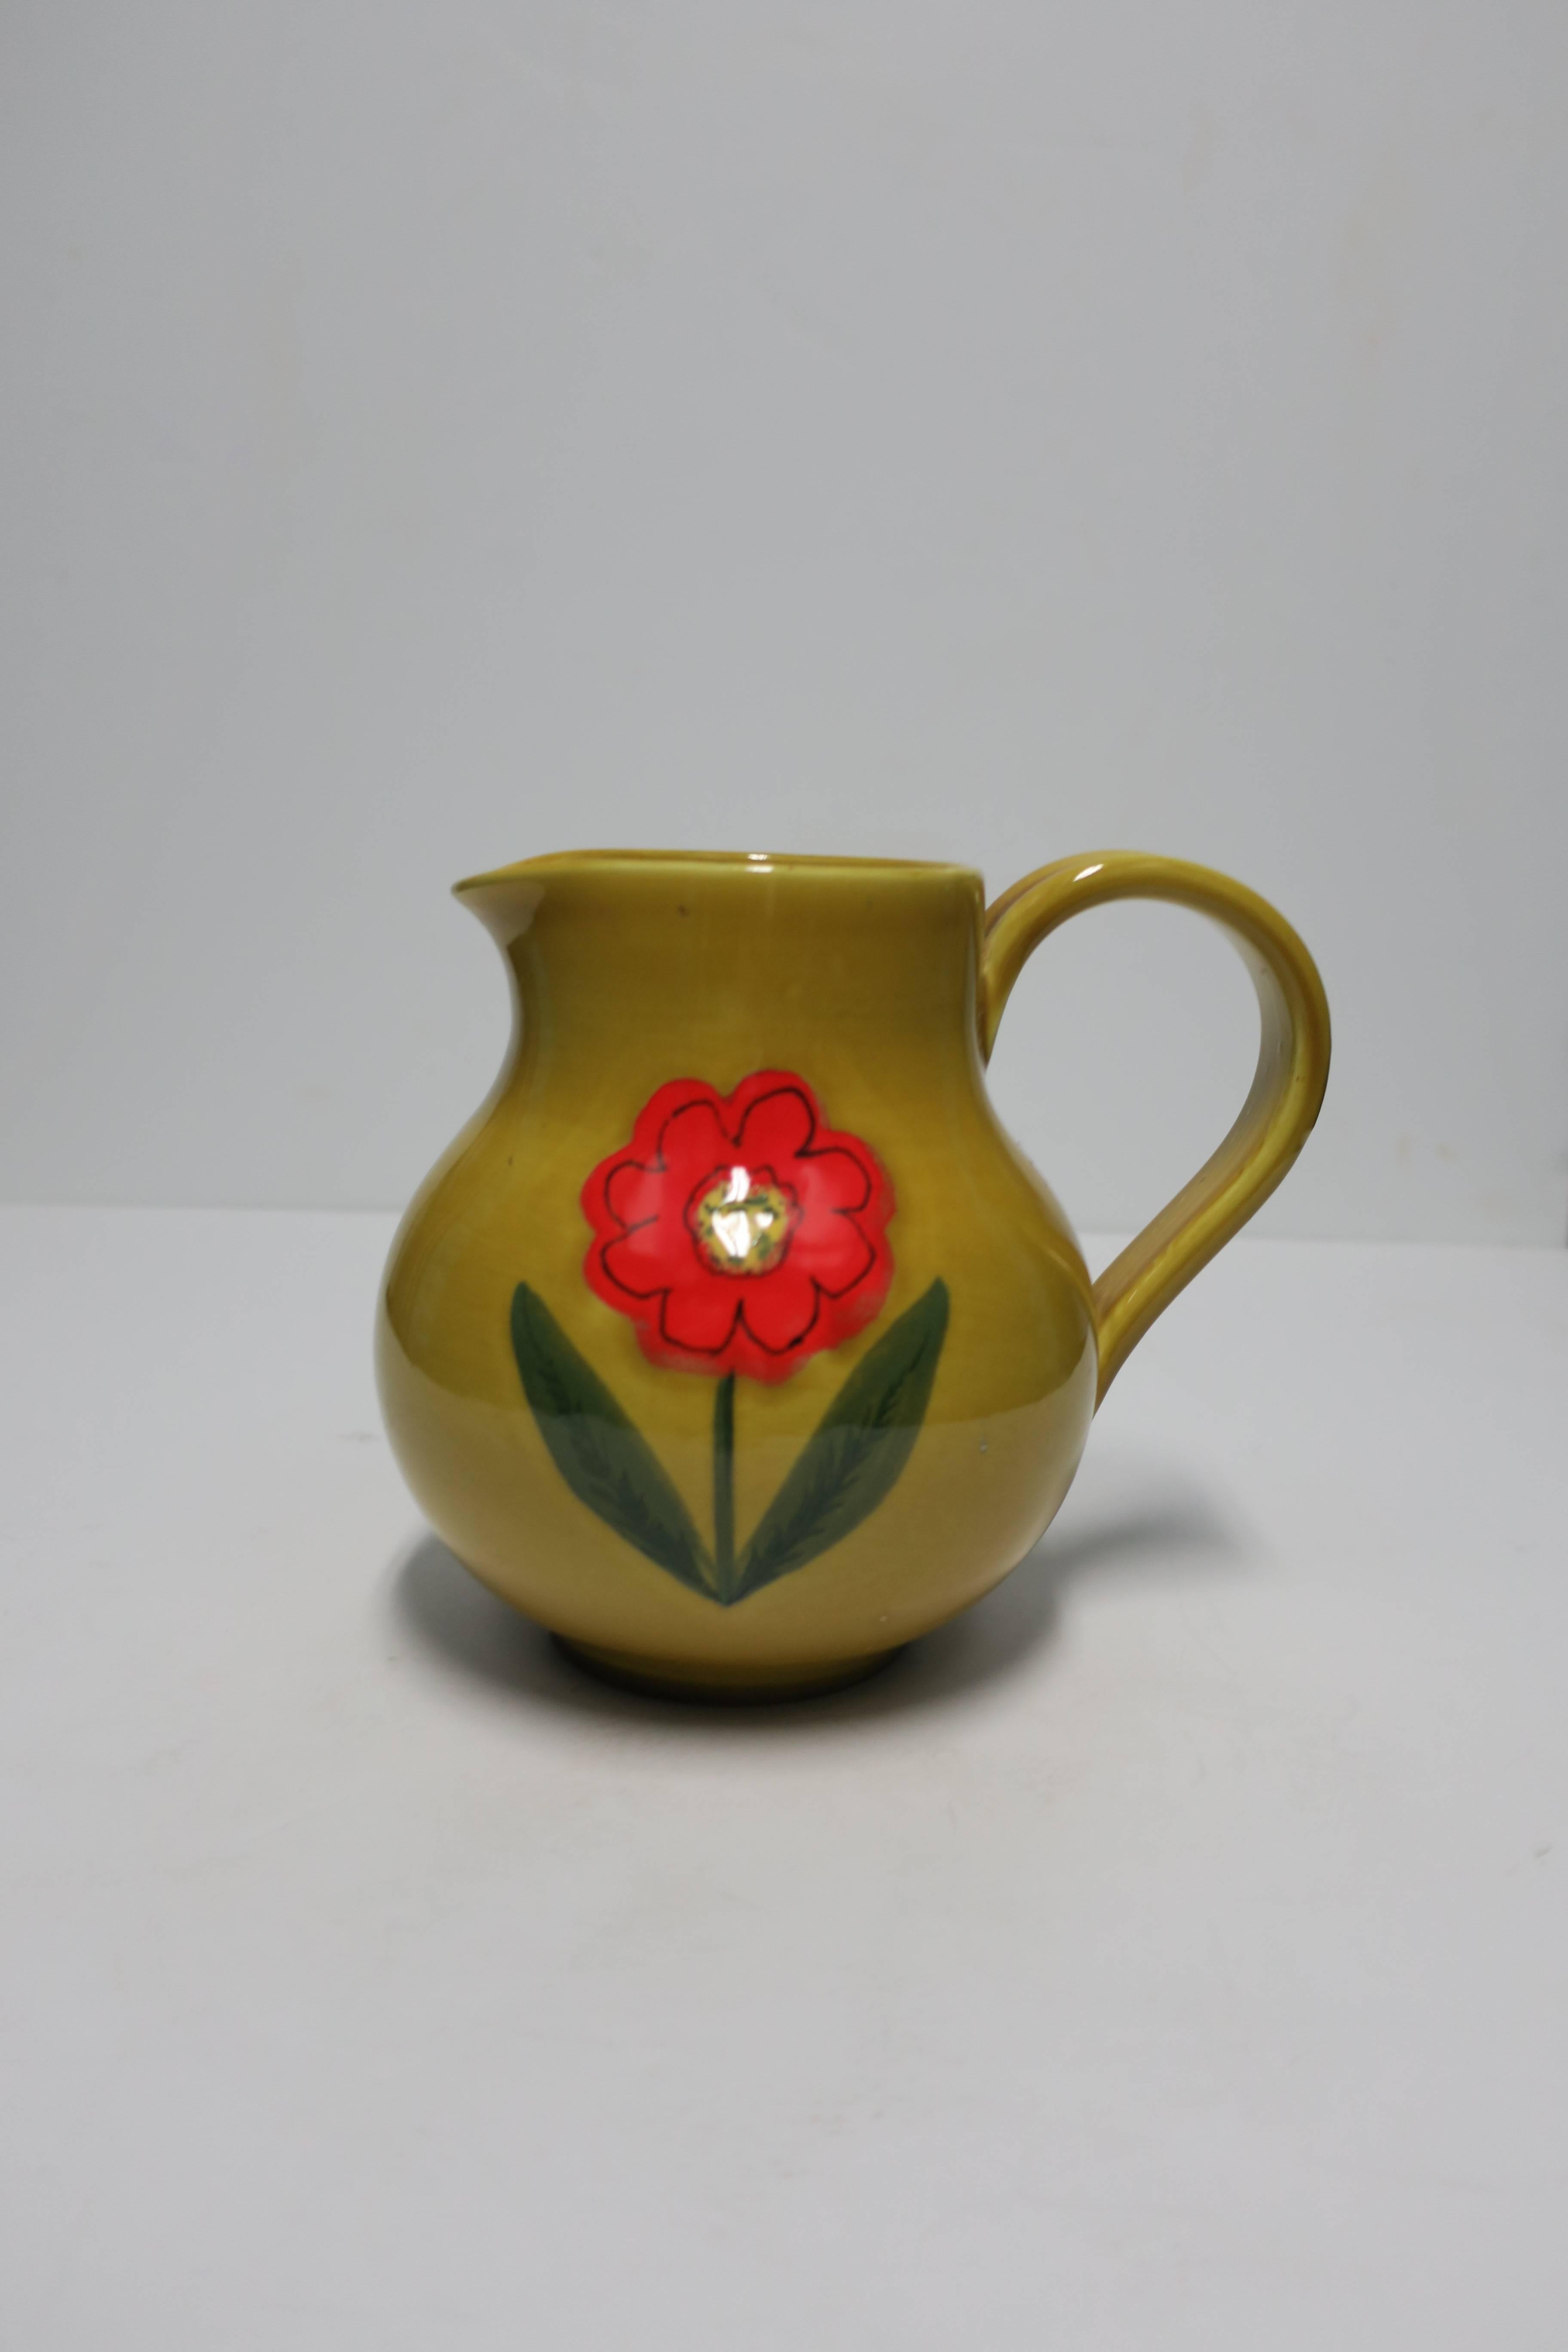 A vintage Italian ceramic pottery pitcher or vase from Italy. Pitcher/vase features a bright red flower on a dark yellow background. Numbered and marked 'Italy' on bottom as shown in image #10. 

Measures 7 in. H. 
